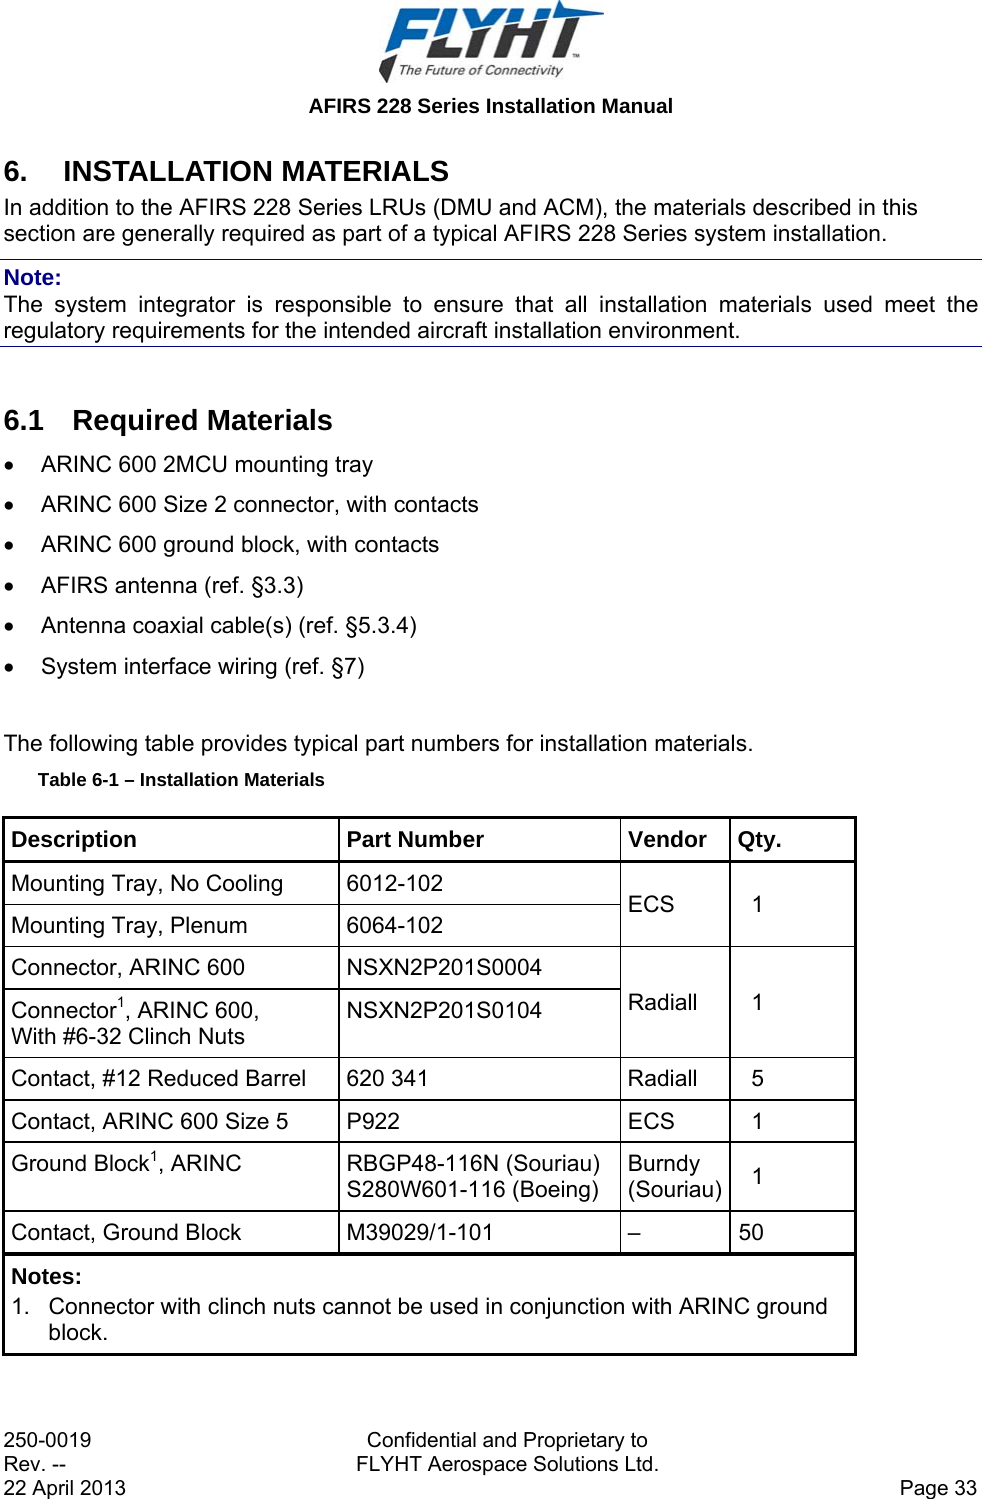  AFIRS 228 Series Installation Manual 250-0019  Confidential and Proprietary to Rev. --  FLYHT Aerospace Solutions Ltd. 22 April 2013    Page 33 6. INSTALLATION MATERIALS In addition to the AFIRS 228 Series LRUs (DMU and ACM), the materials described in this section are generally required as part of a typical AFIRS 228 Series system installation. Note: The system integrator is responsible to ensure that all installation materials used meet the regulatory requirements for the intended aircraft installation environment.  6.1 Required Materials   ARINC 600 2MCU mounting tray   ARINC 600 Size 2 connector, with contacts   ARINC 600 ground block, with contacts   AFIRS antenna (ref. §3.3)   Antenna coaxial cable(s) (ref. §5.3.4)   System interface wiring (ref. §7)  The following table provides typical part numbers for installation materials.  Table 6-1 – Installation Materials Description Part Number Vendor Qty. Mounting Tray, No Cooling  6012-102  ECS 1 Mounting Tray, Plenum  6064-102 Connector, ARINC 600  NSXN2P201S0004 Radiall 1 Connector1, ARINC 600, With #6-32 Clinch Nuts NSXN2P201S0104 Contact, #12 Reduced Barrel  620 341  Radiall  5 Contact, ARINC 600 Size 5  P922  ECS  1 Ground Block1, ARINC  RBGP48-116N (Souriau) S280W601-116 (Boeing) Burndy (Souriau)  1 Contact, Ground Block  M39029/1-101  –  50 Notes: 1.   Connector with clinch nuts cannot be used in conjunction with ARINC ground block.  